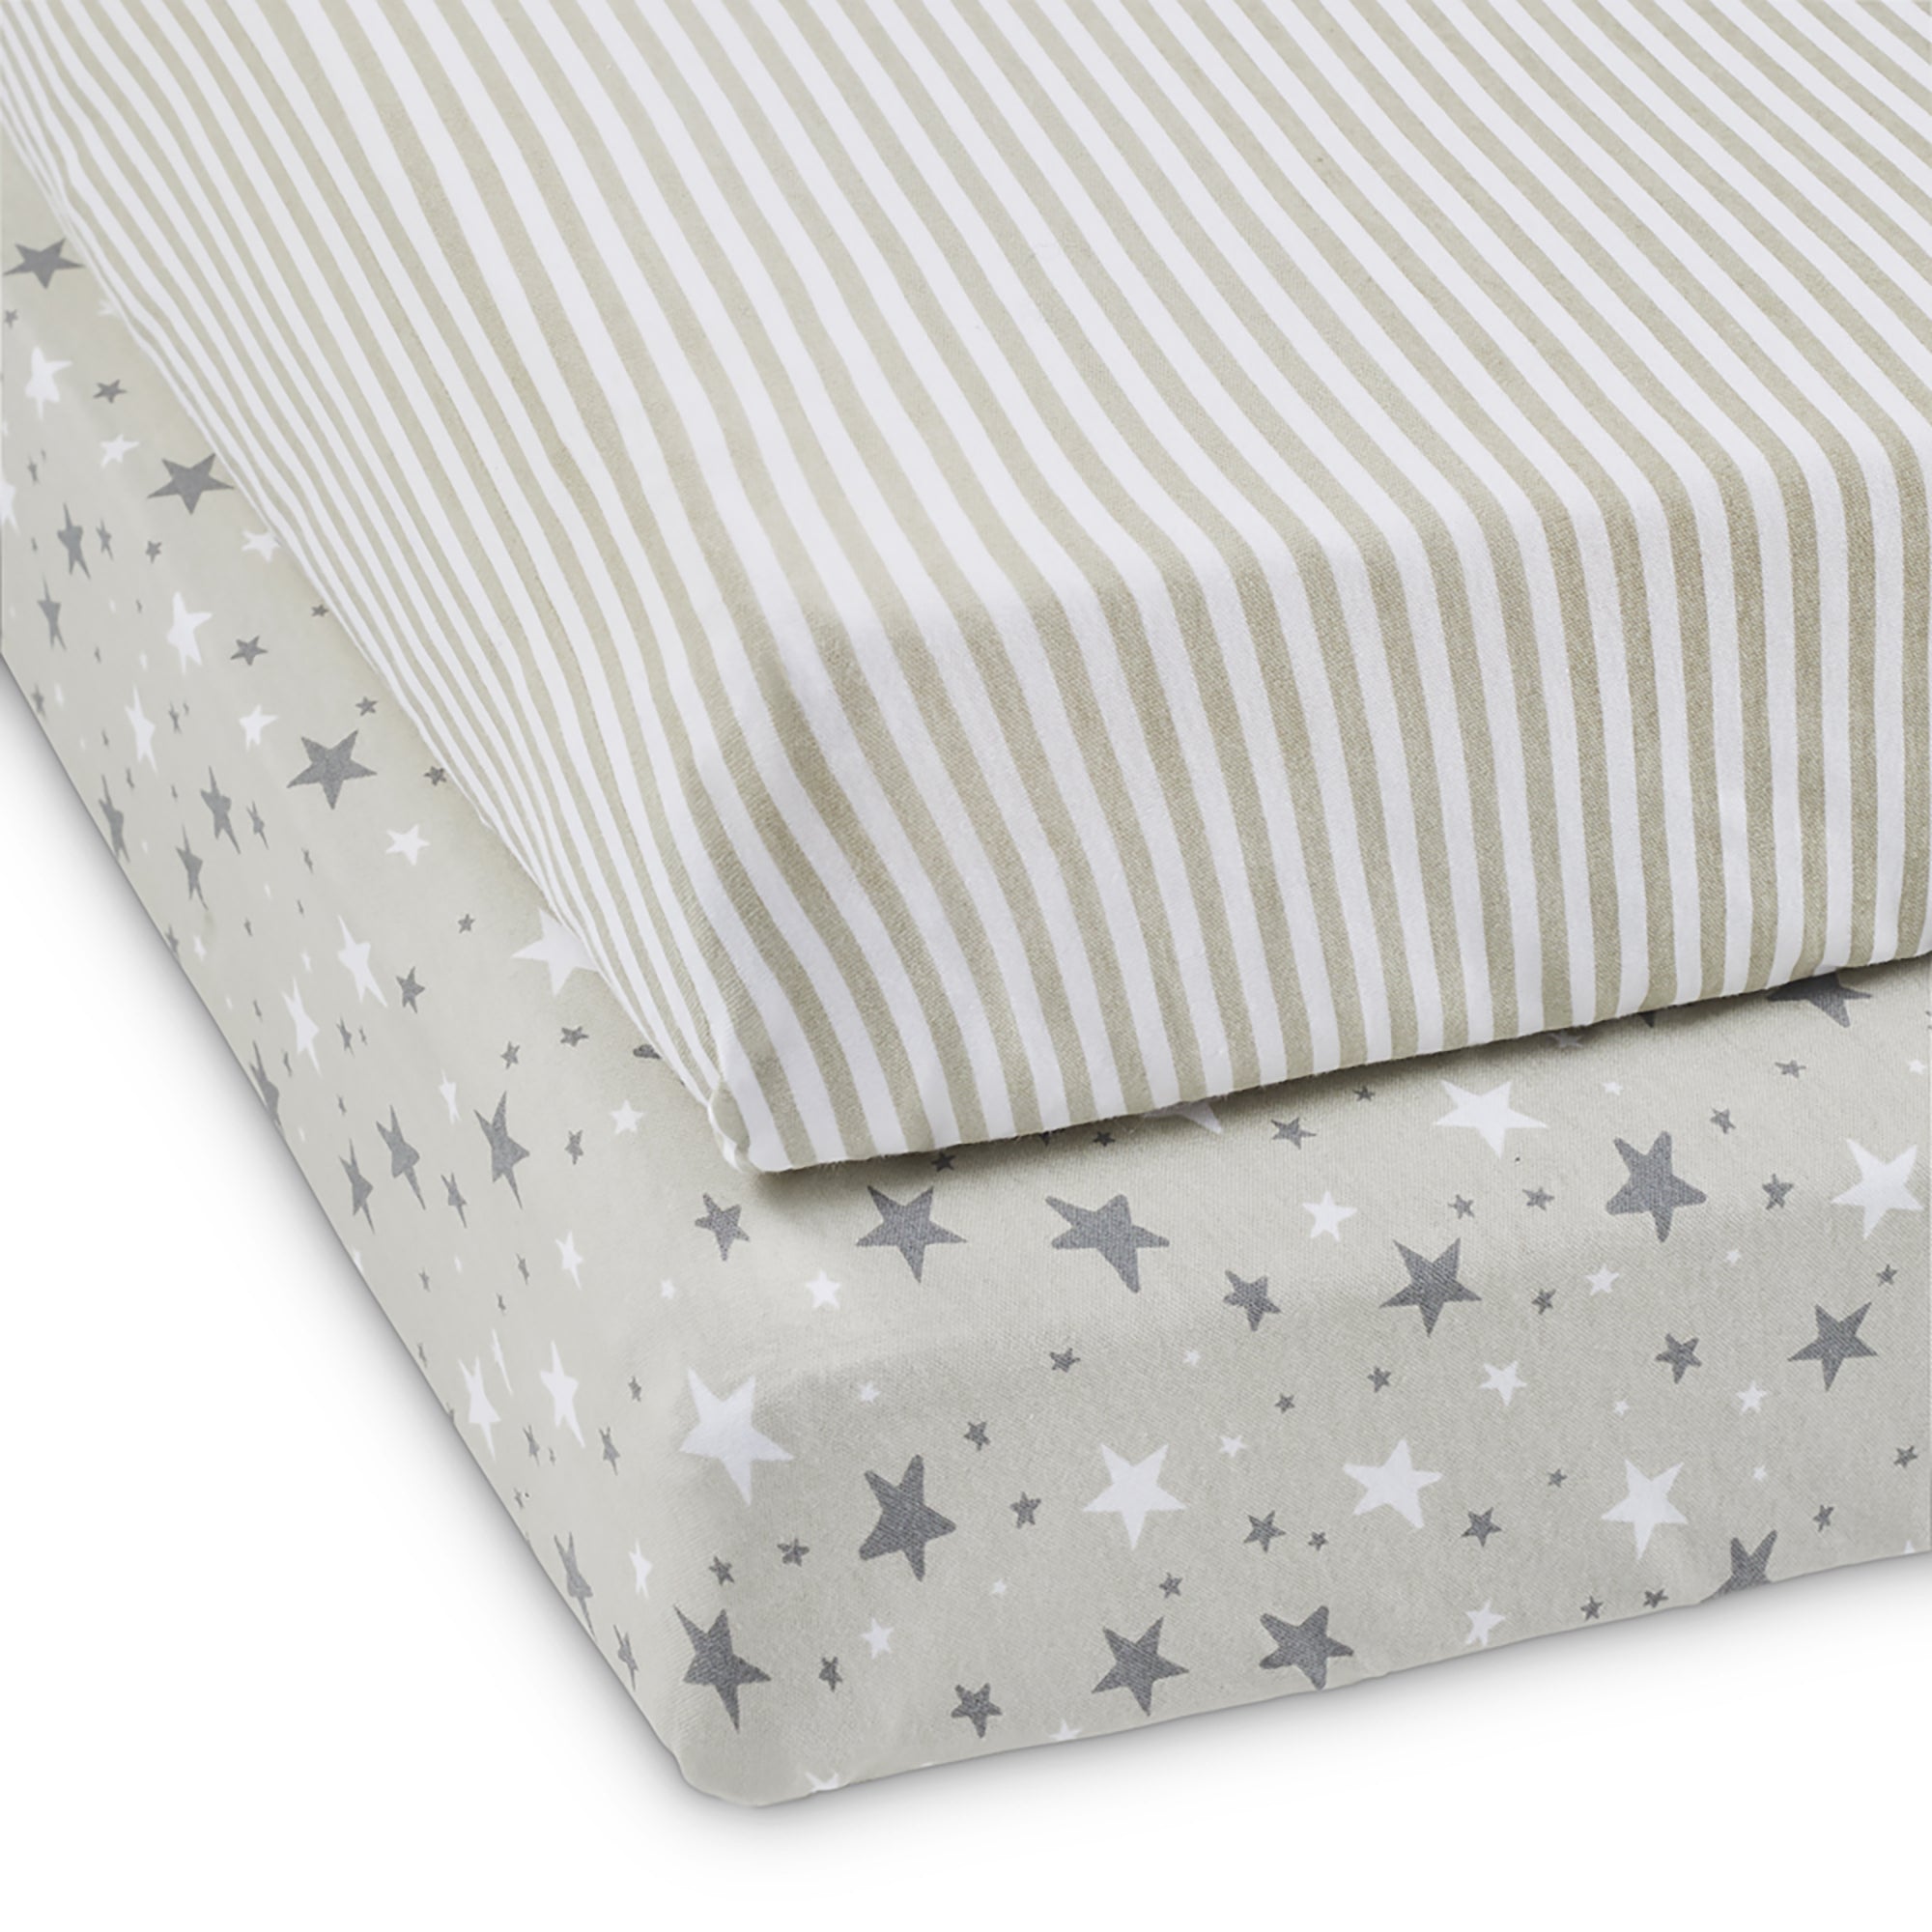 Cot Bed Sheets - 2 Pack